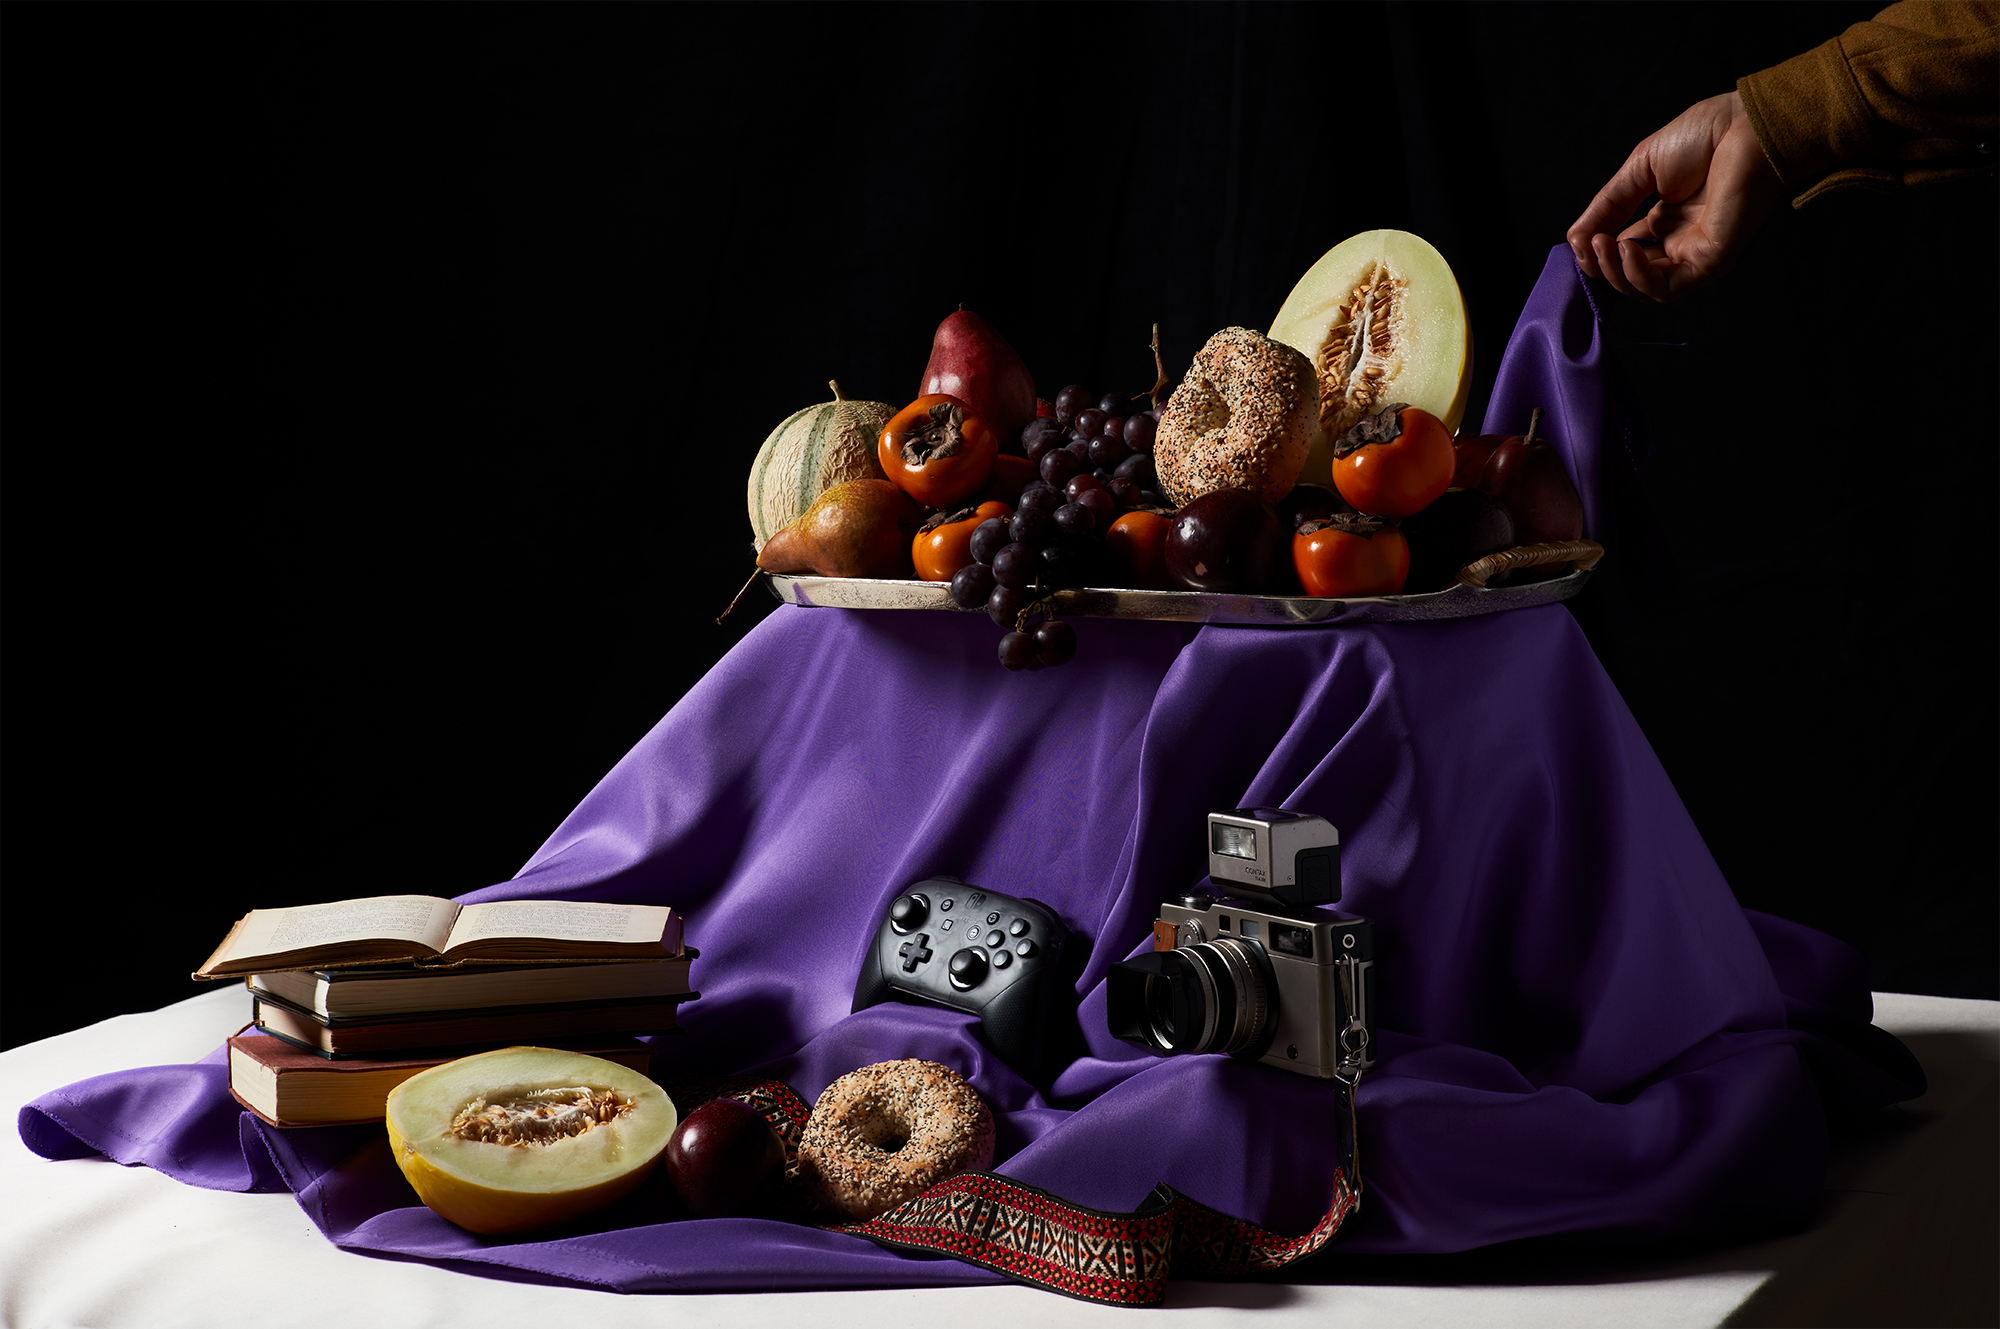 A still life arrangement featuring a variety of fruits, bagels, and books on a purple cloth, alongside a vintage camera and a video game controller. A person’s hand adjusts the cloth from the right side.